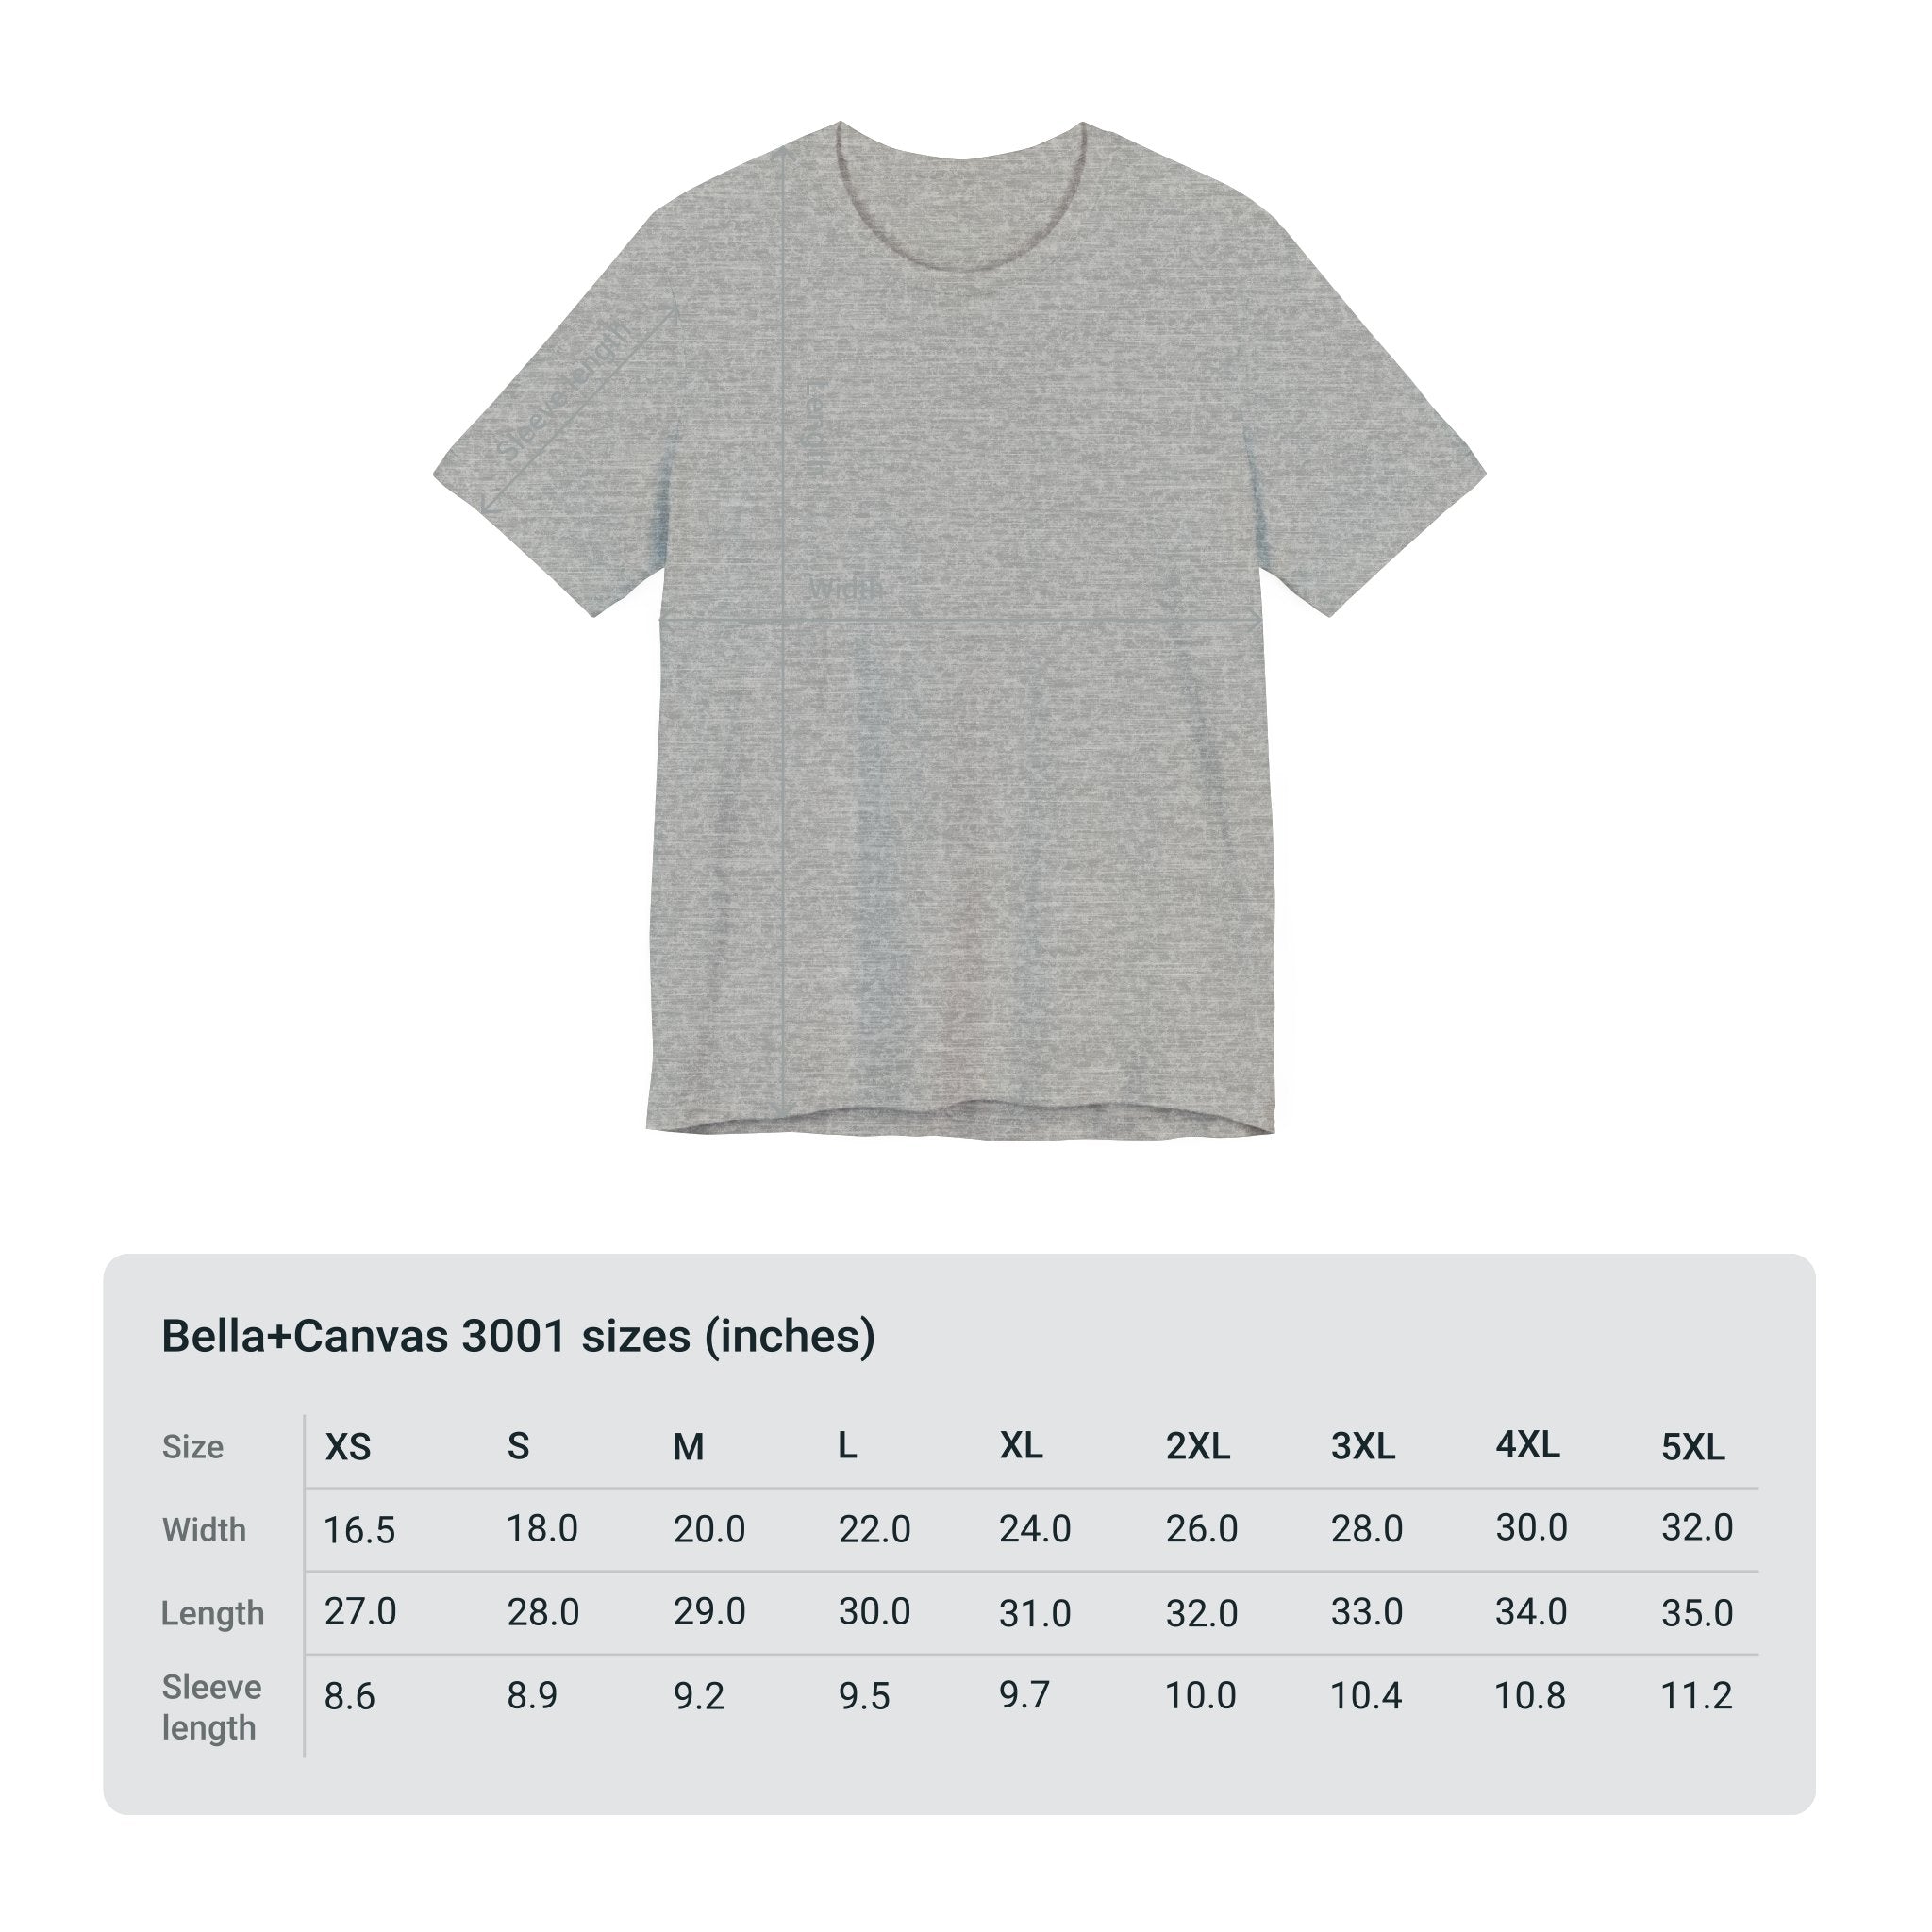 Adventure Unlimited printed grey t-shirt with white logo on front - Soulshinecreators EU